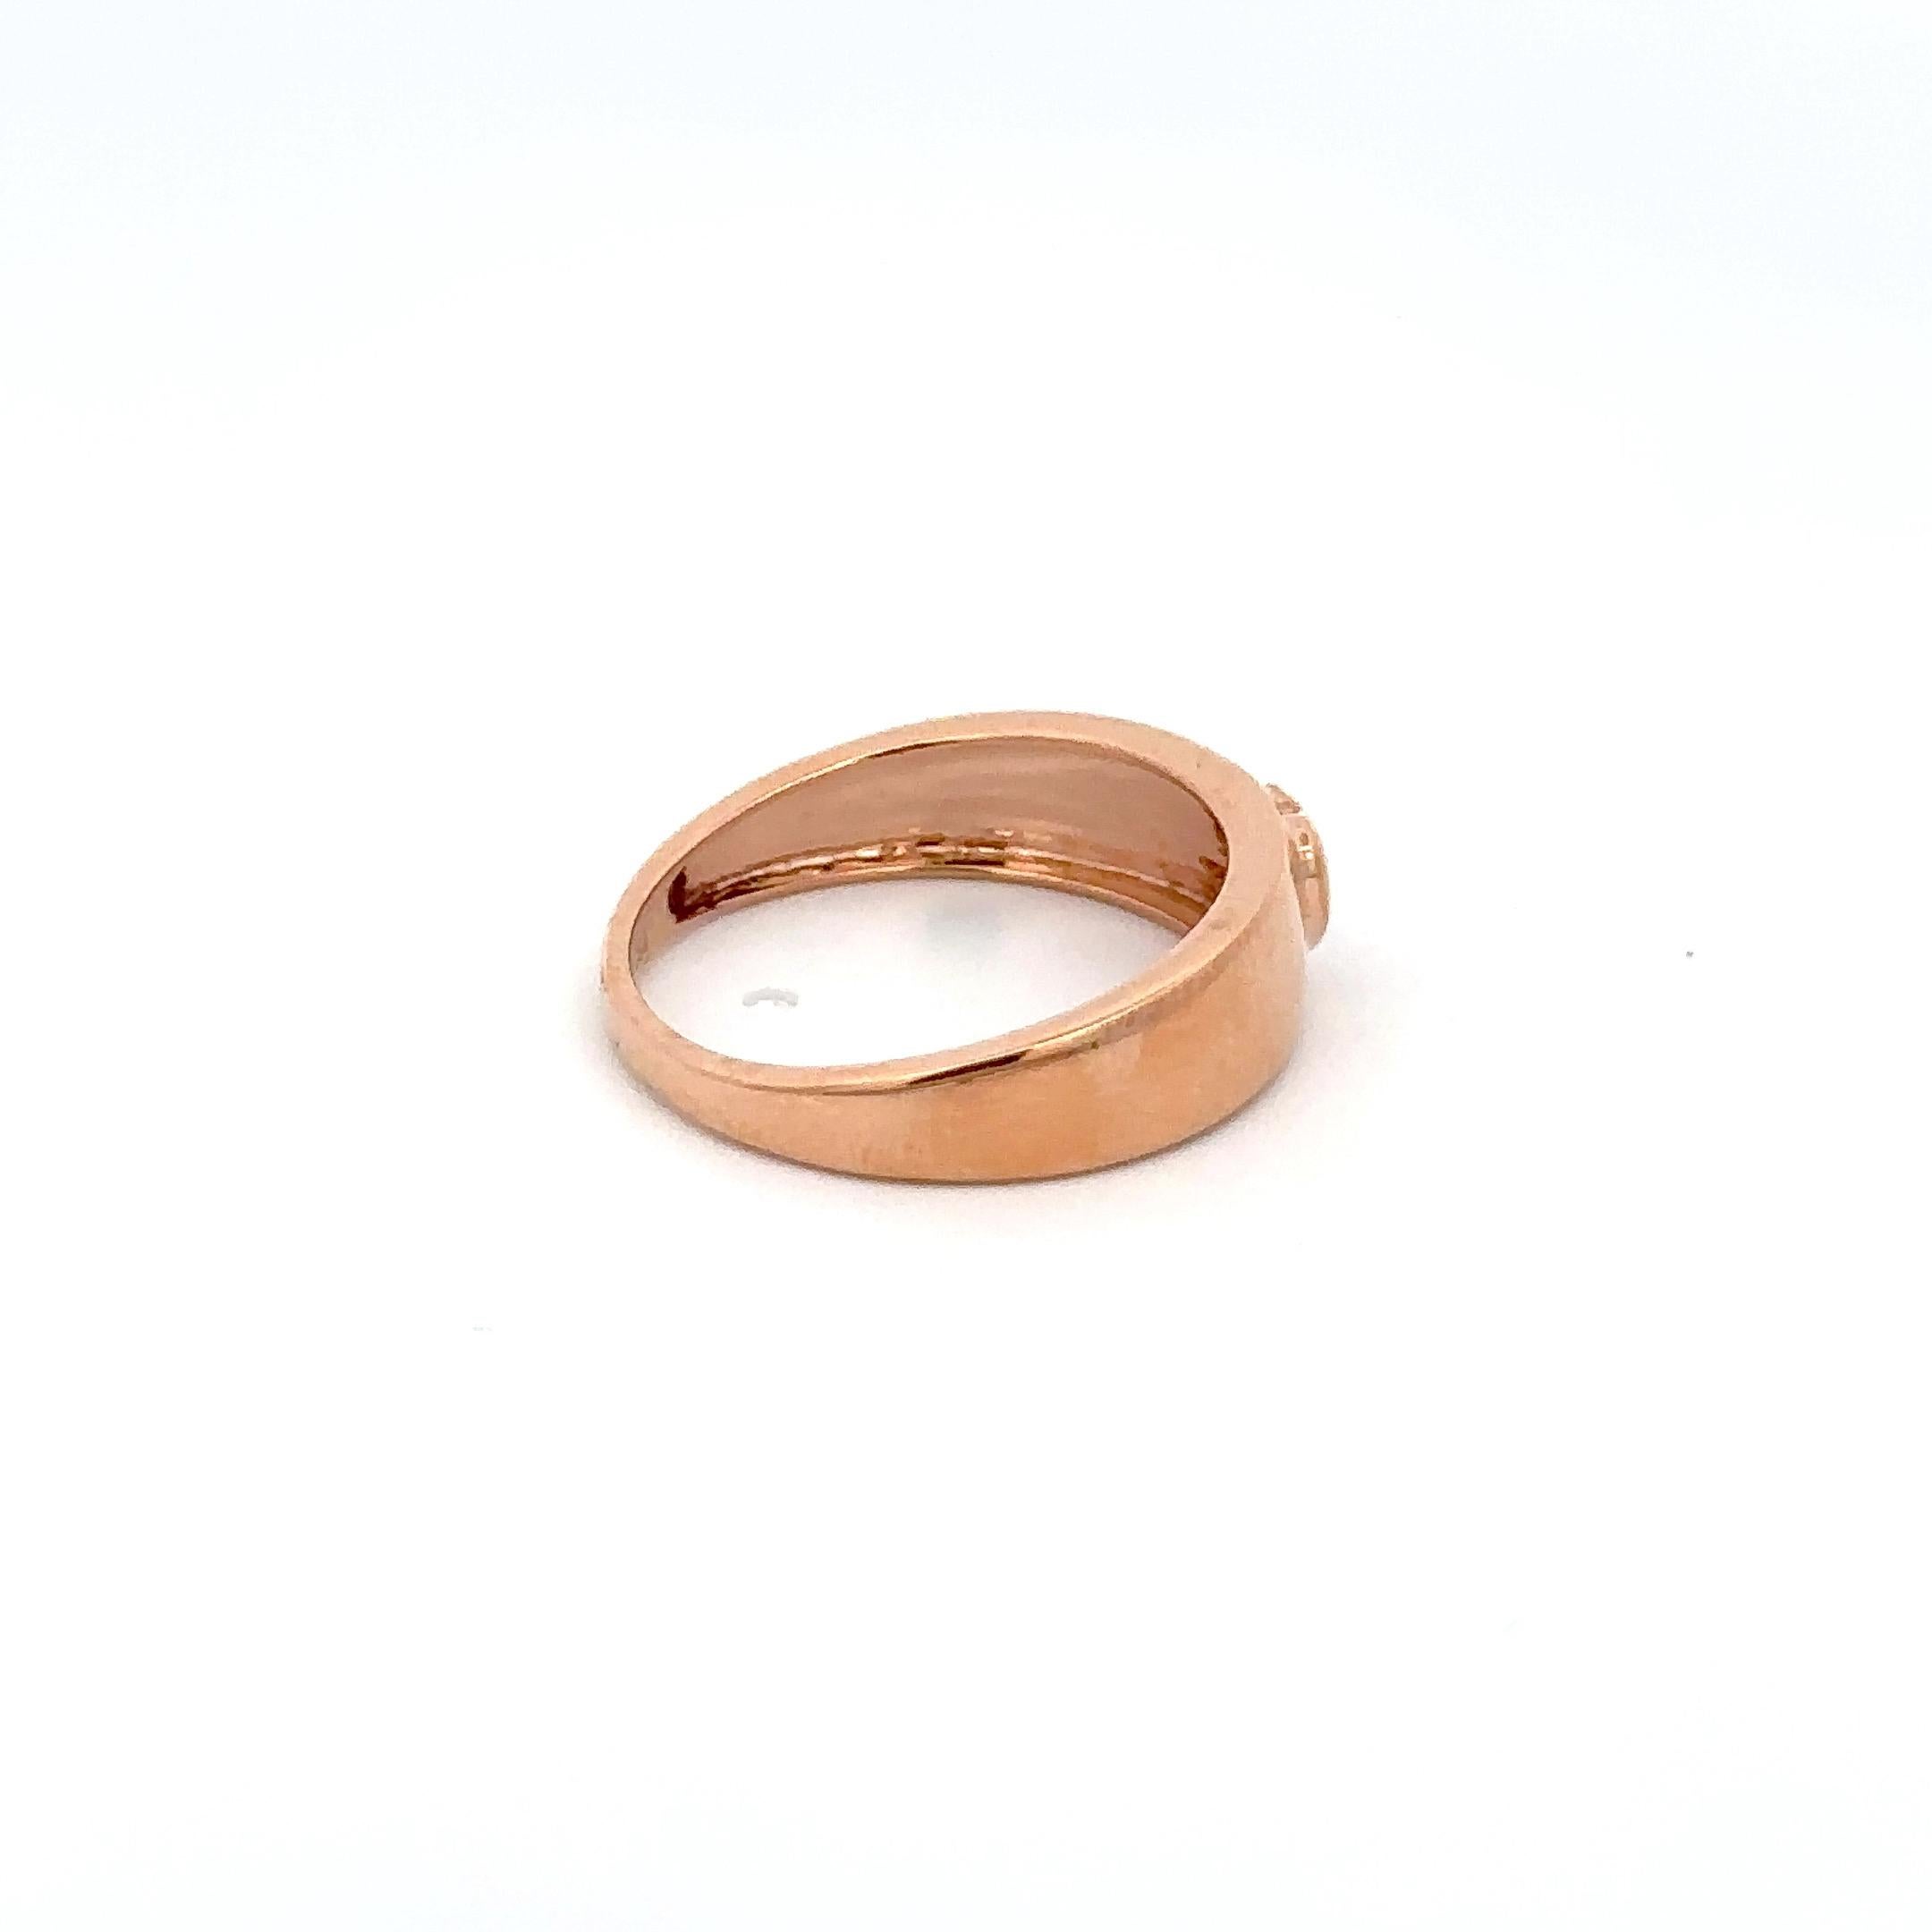 For Sale:  18k Solid Rose Gold Signet Ring Dainty Heart Cut Pink Sapphire Pinky Ring  11